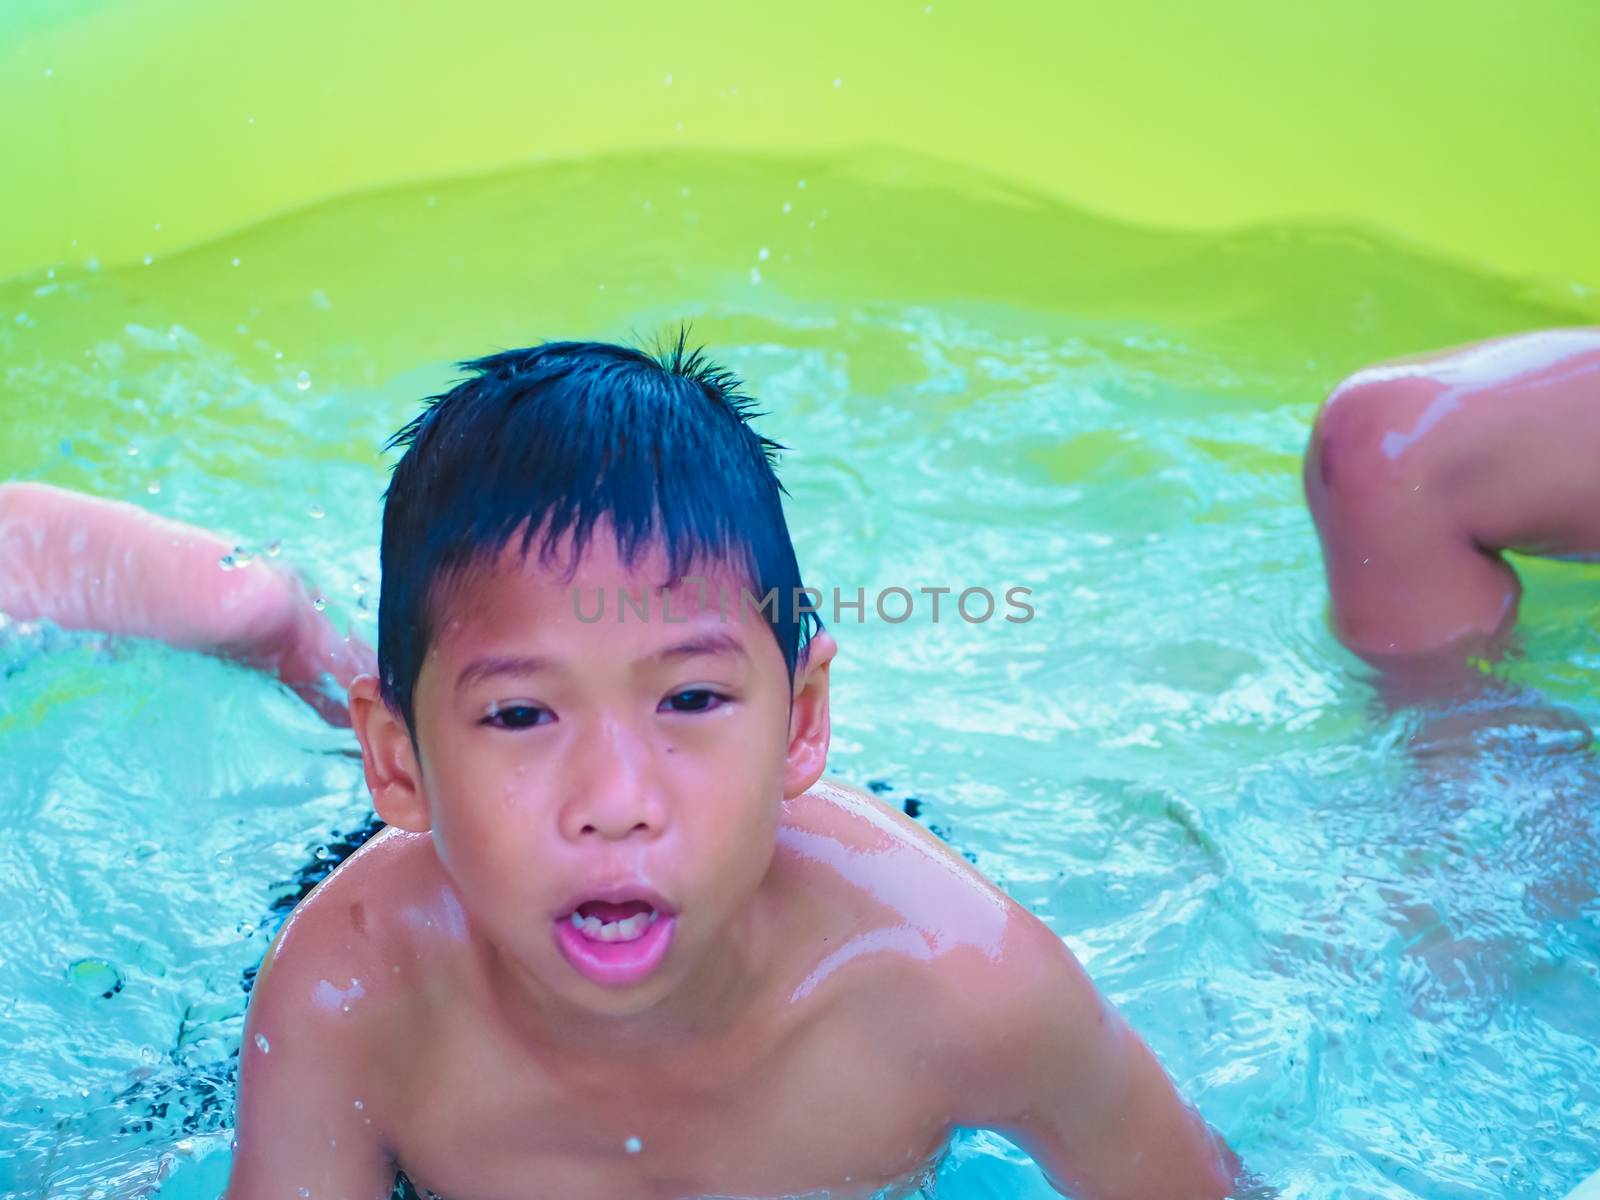 A boy playing in the pool and Smile happily. by Unimages2527